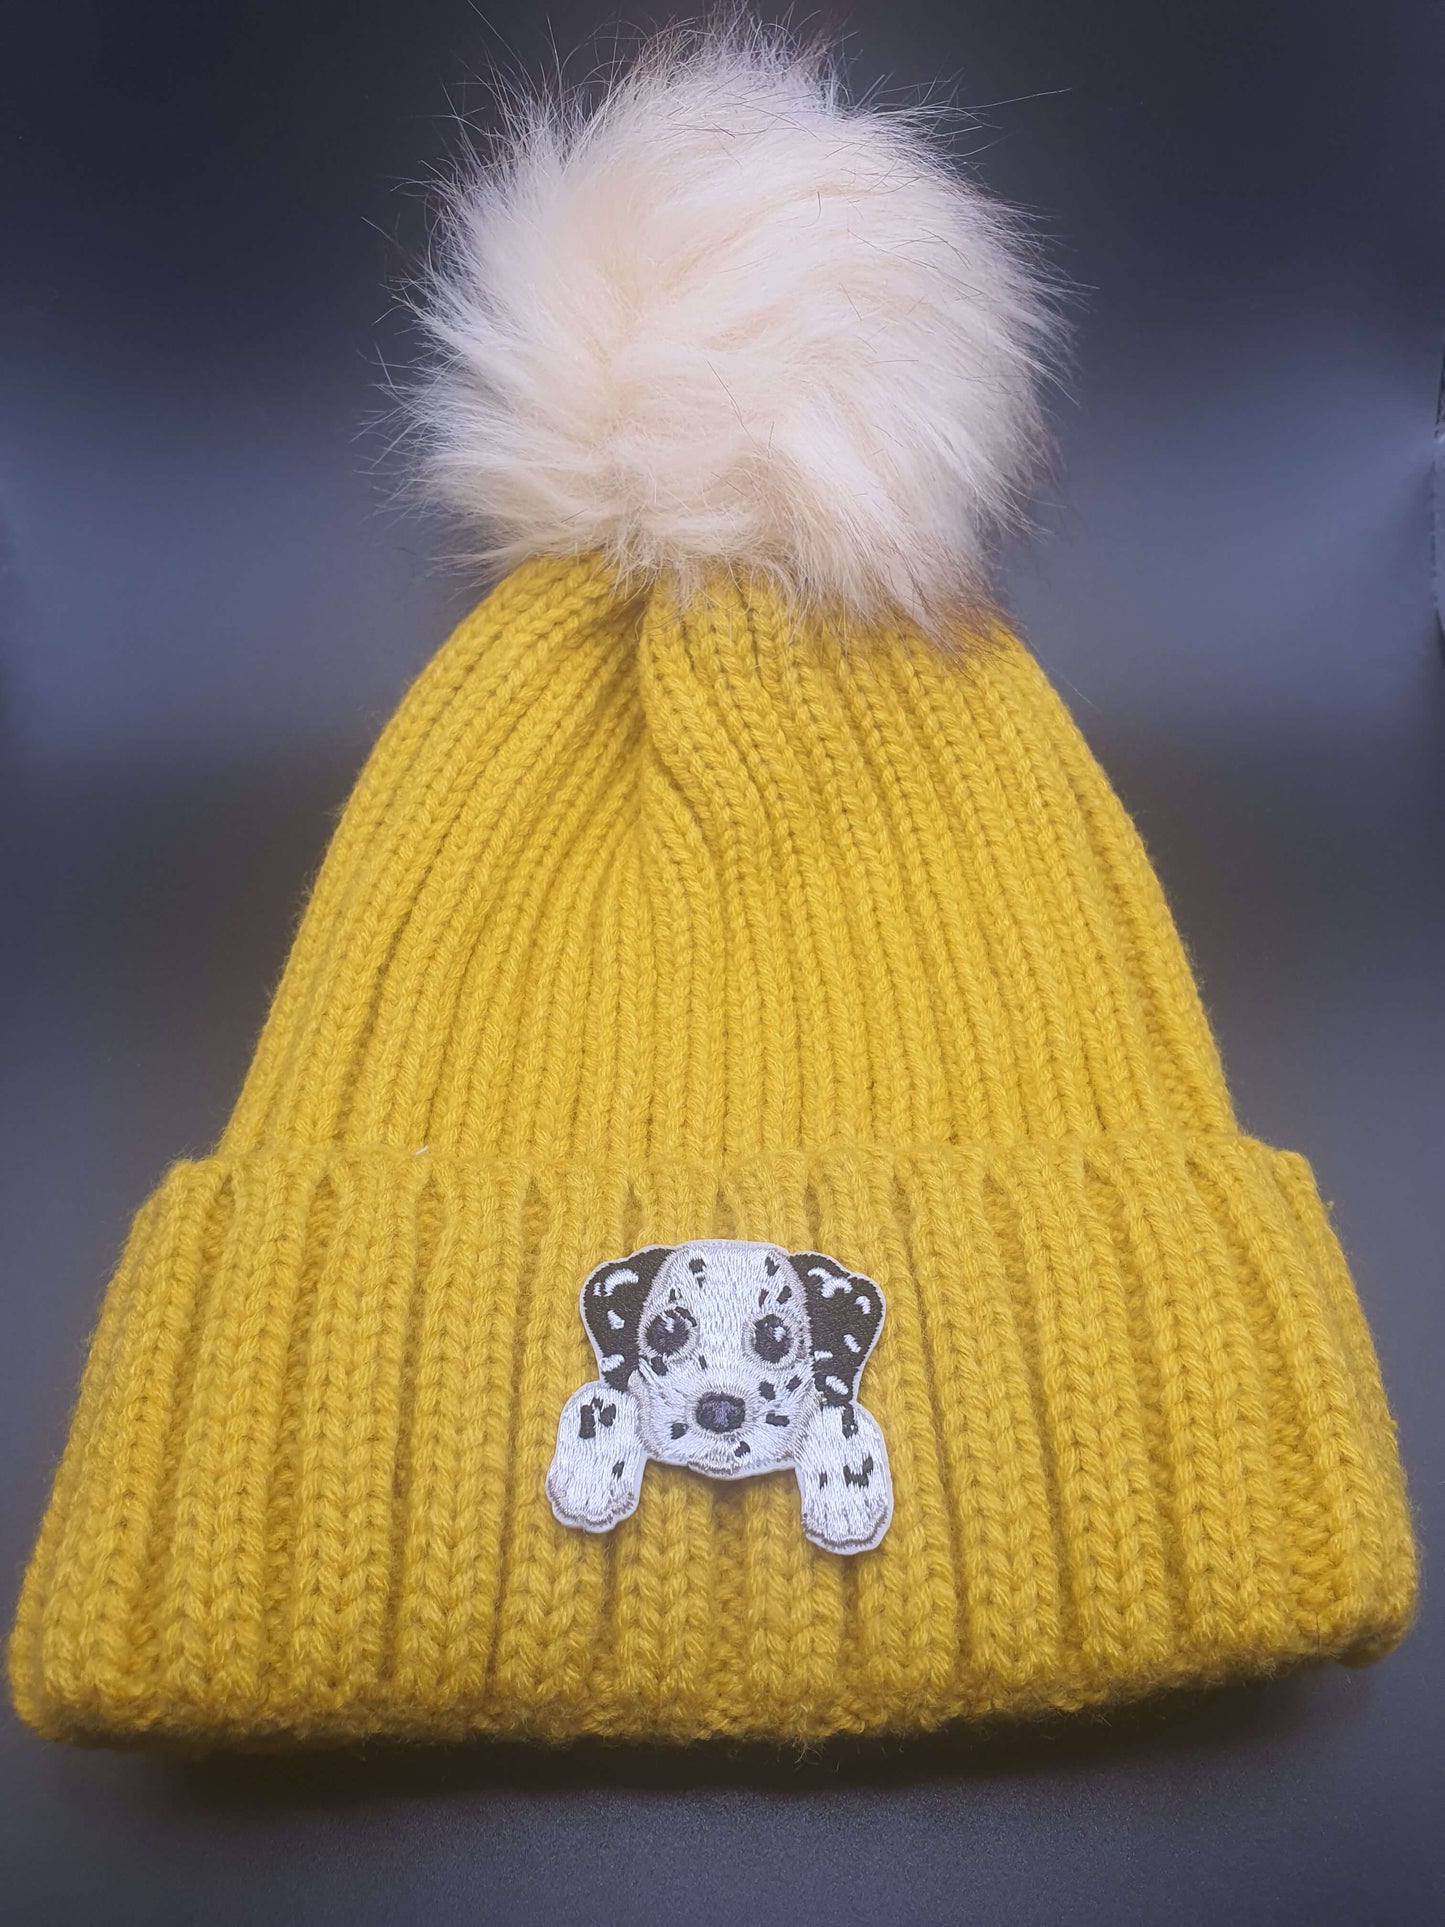 Dog Themed Knitted Beanies - Style's Bug Dalmatian / Yellow